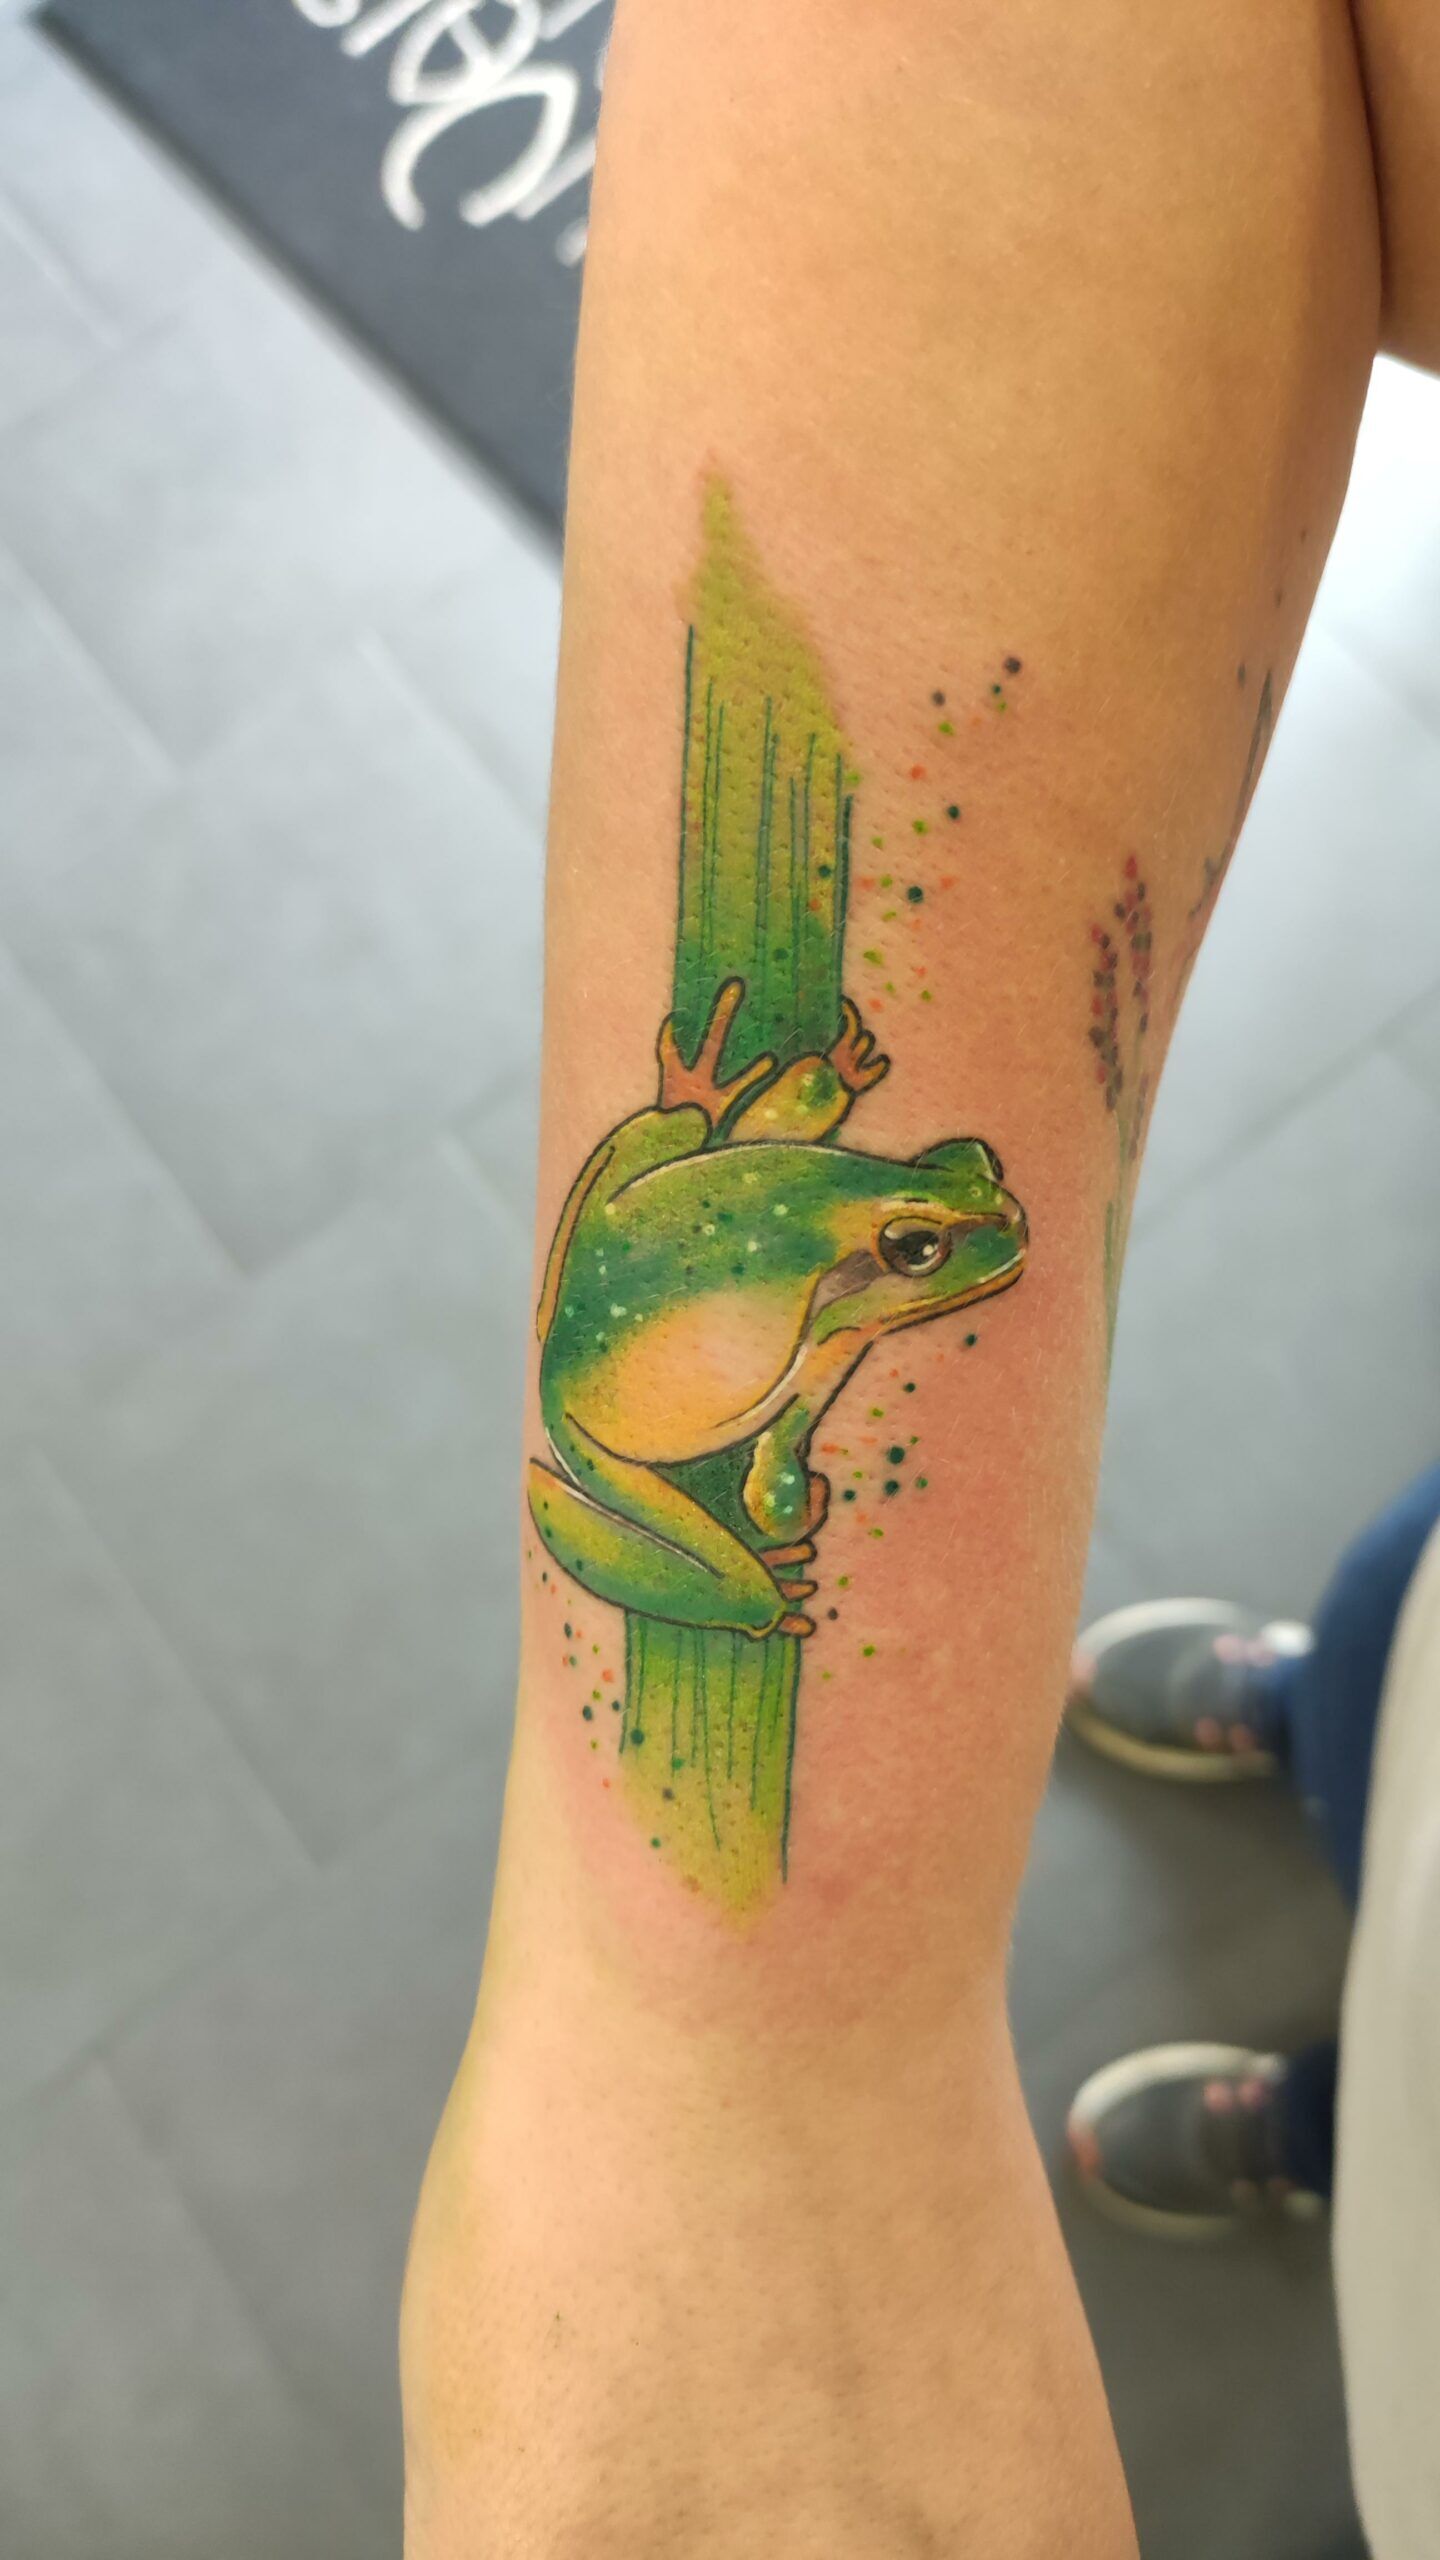 French frog tattoo from Saperlipopette Tattoo Occitanie France scaled